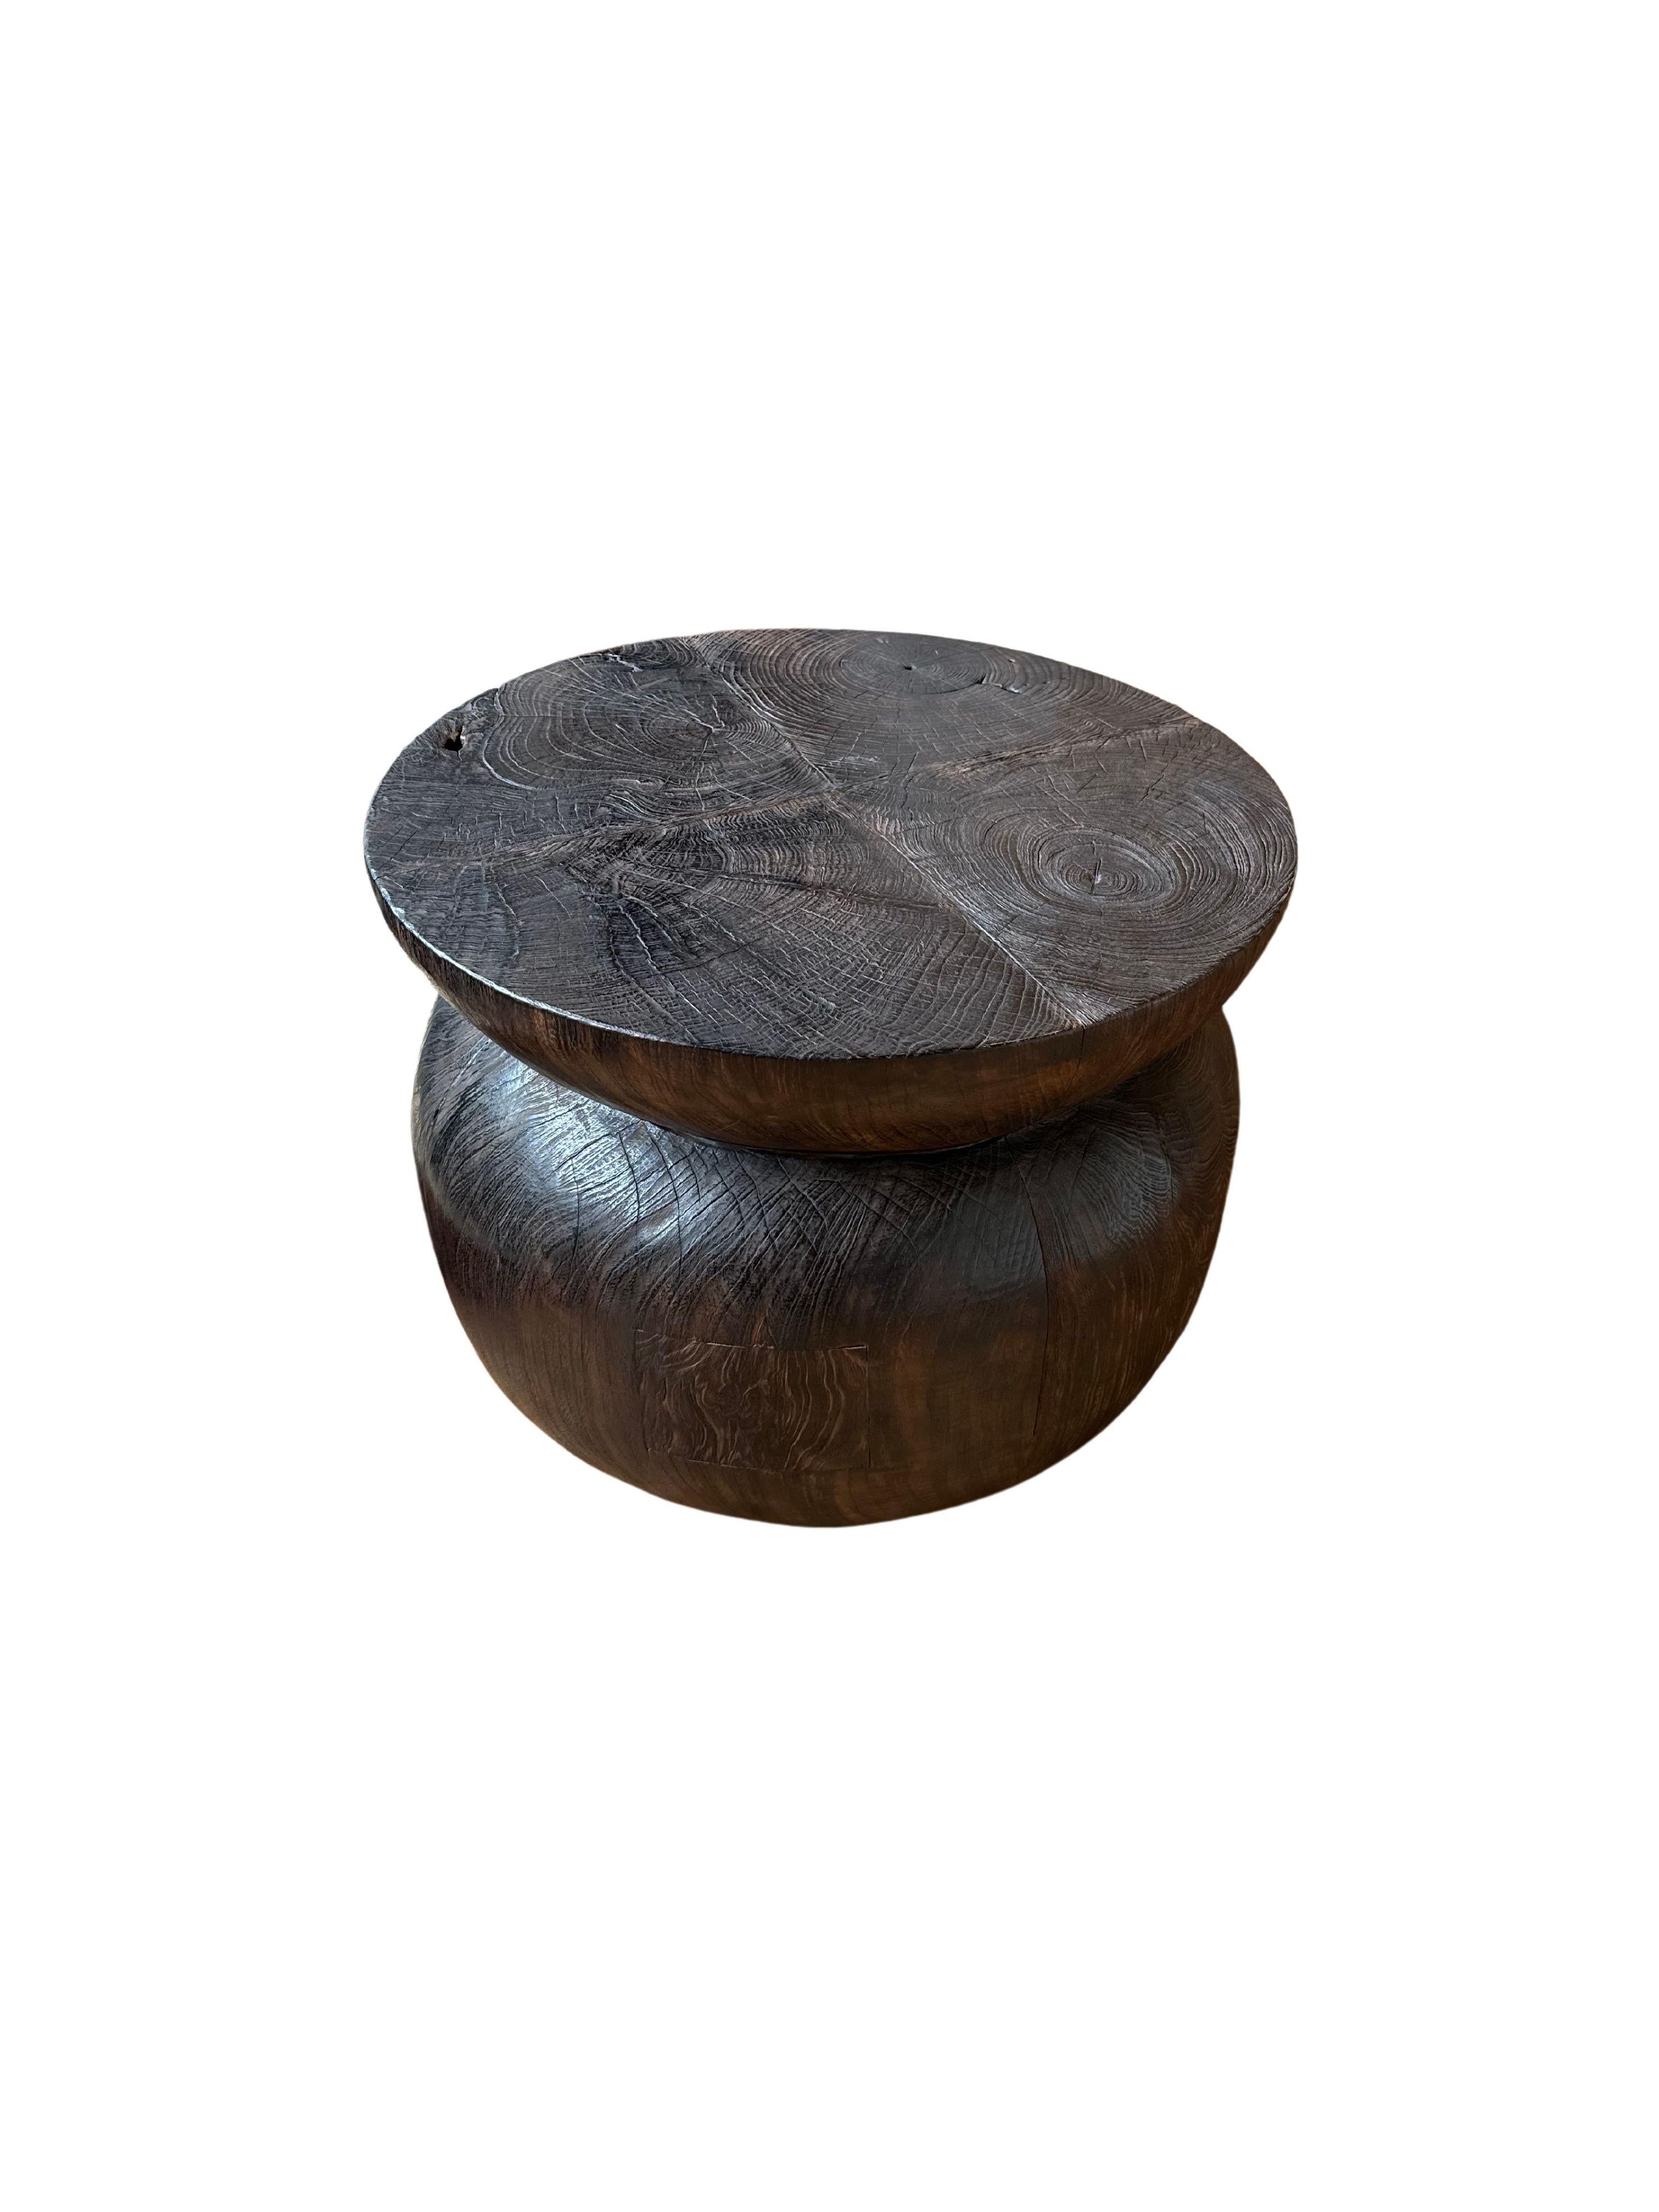 Sculptural Round Teak Wood Side Table, Burnt Finish, Modern Organic In New Condition For Sale In Jimbaran, Bali